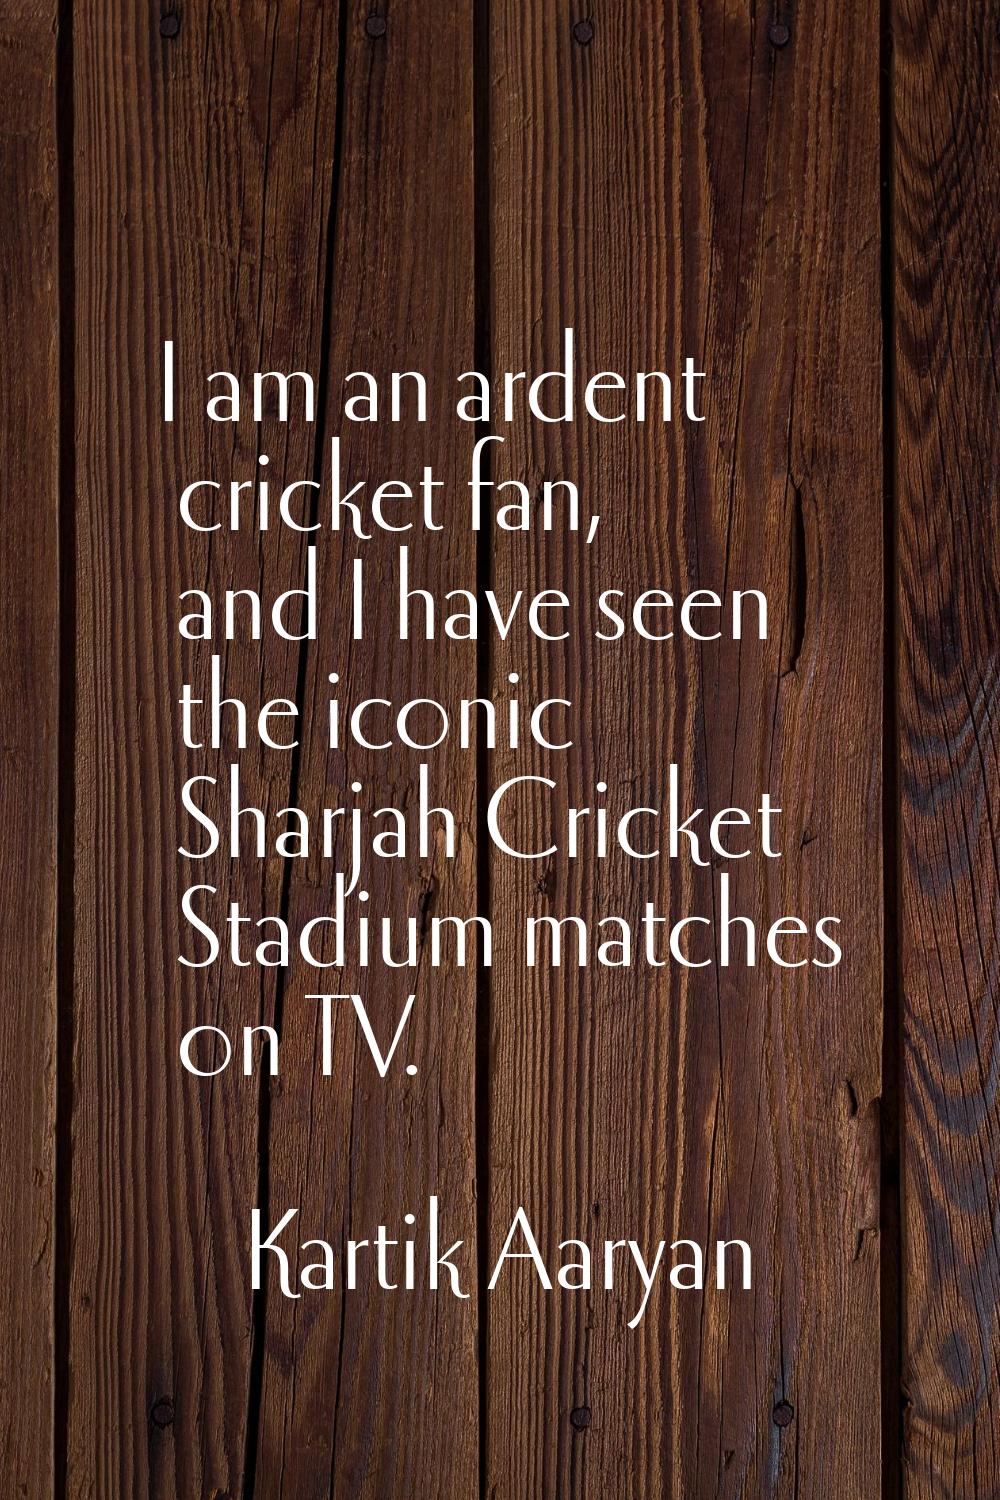 I am an ardent cricket fan, and I have seen the iconic Sharjah Cricket Stadium matches on TV.